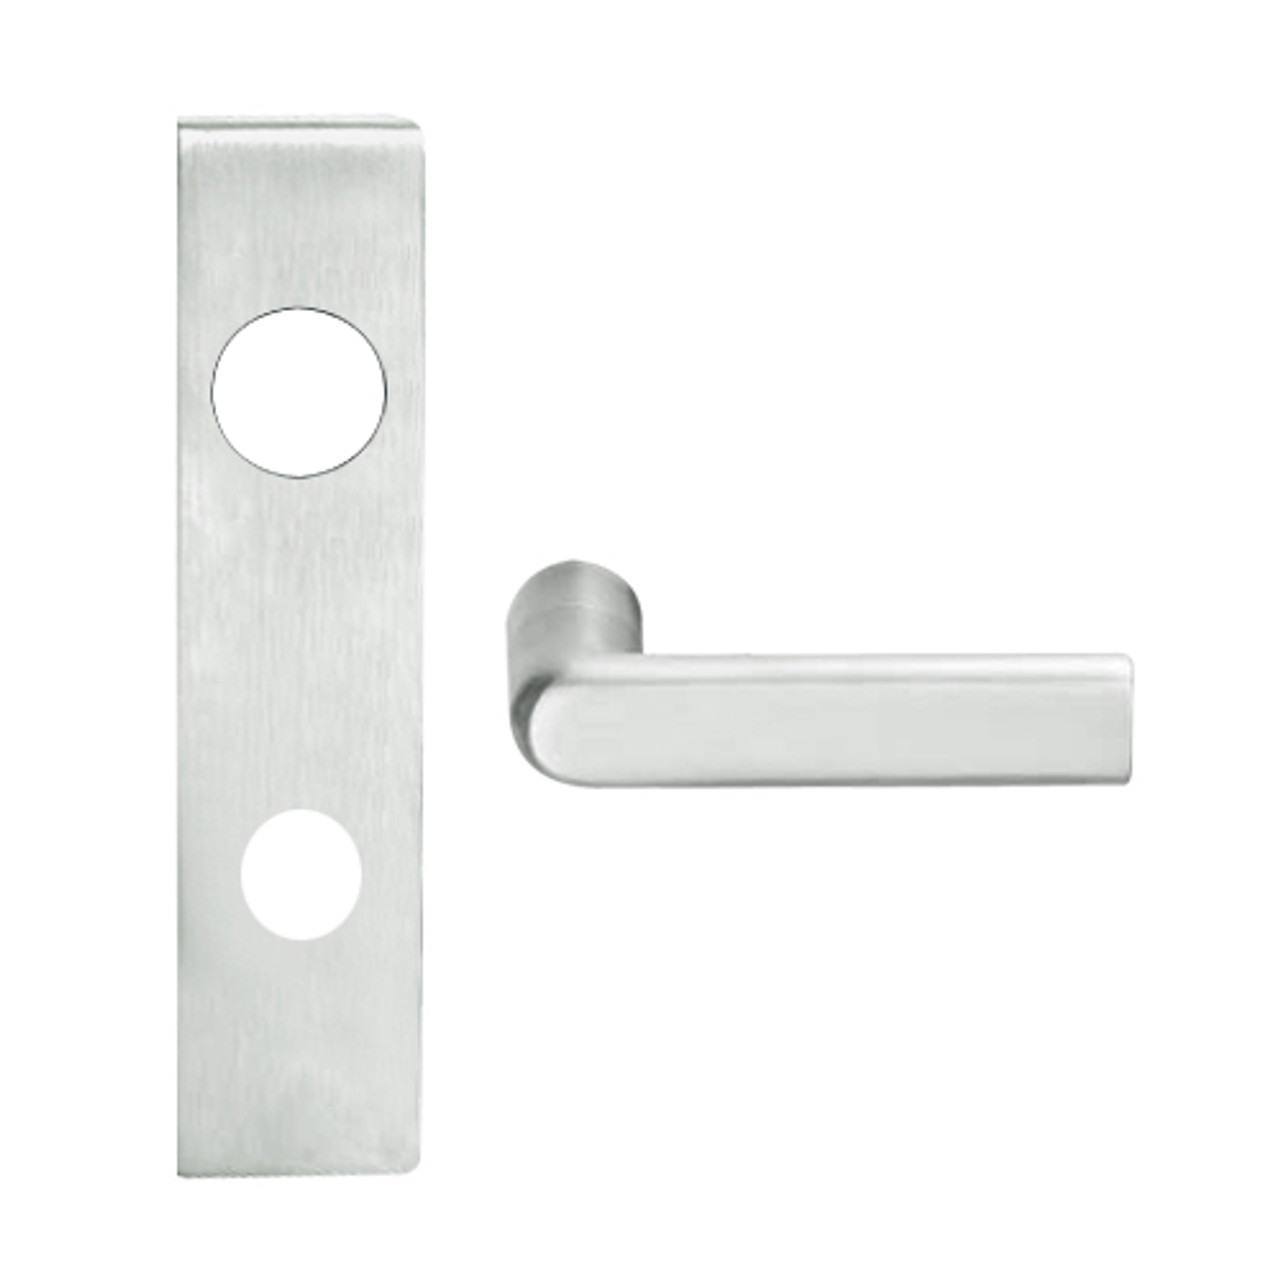 L9082L-01L-619 Schlage L Series Less Cylinder Institution Commercial Mortise Lock with 01 Cast Lever Design in Satin Nickel